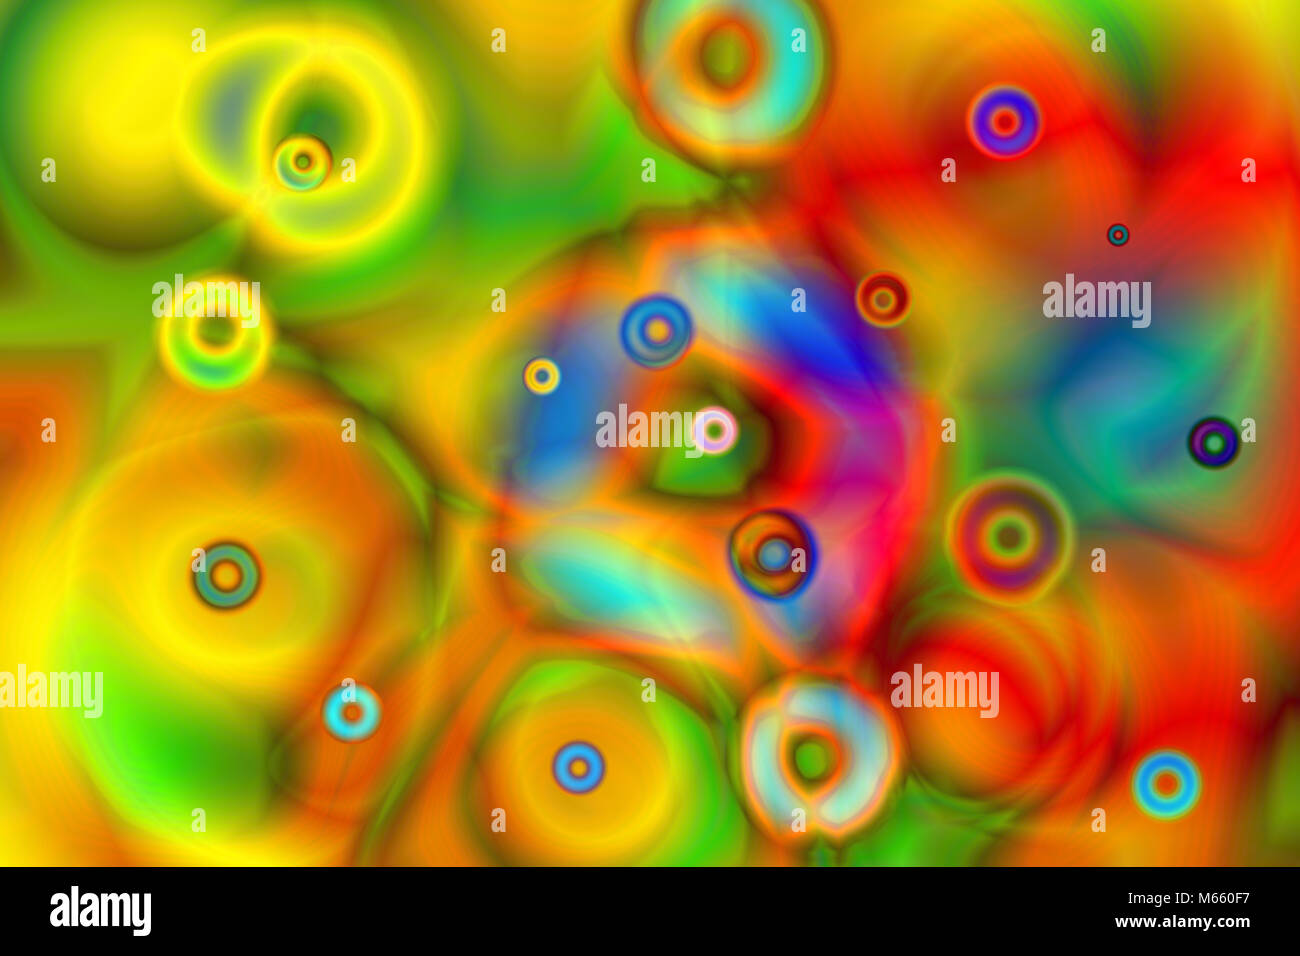 Colorful computer generated abstract background with various colors Stock Photo